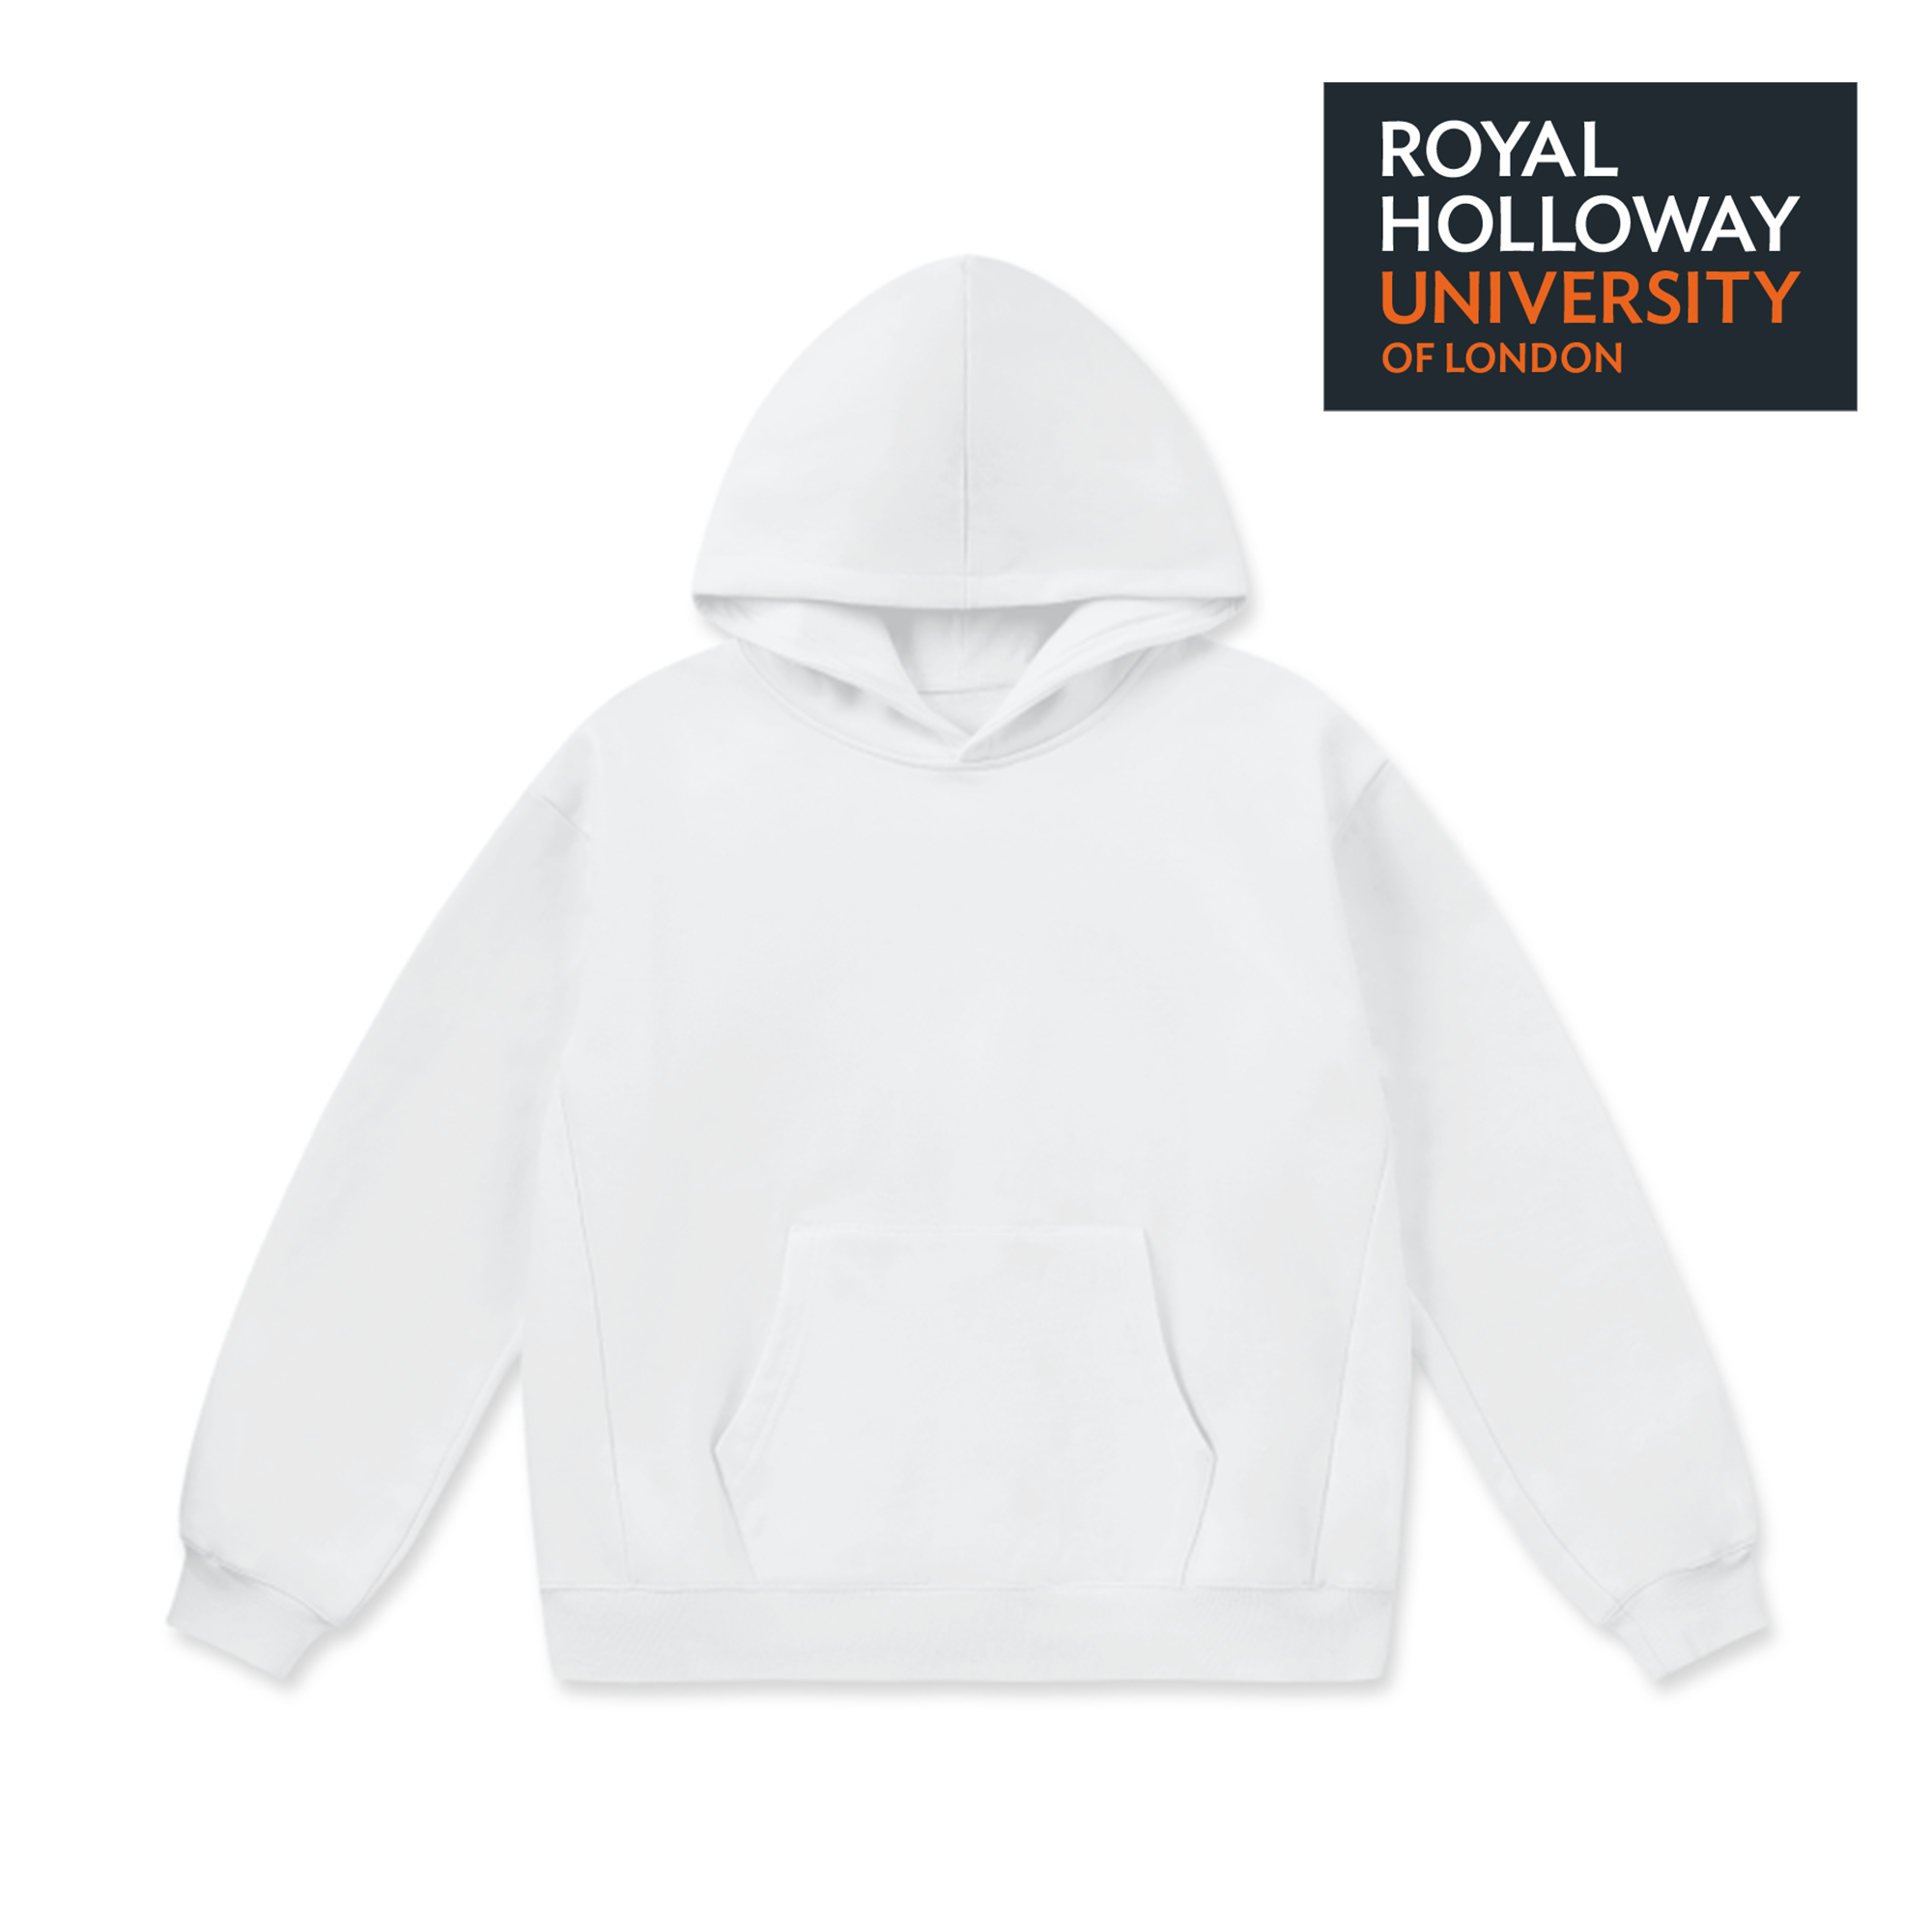 LCC Super Weighted Hoodie - Royal Holloway University of London (Modern Ver.2)